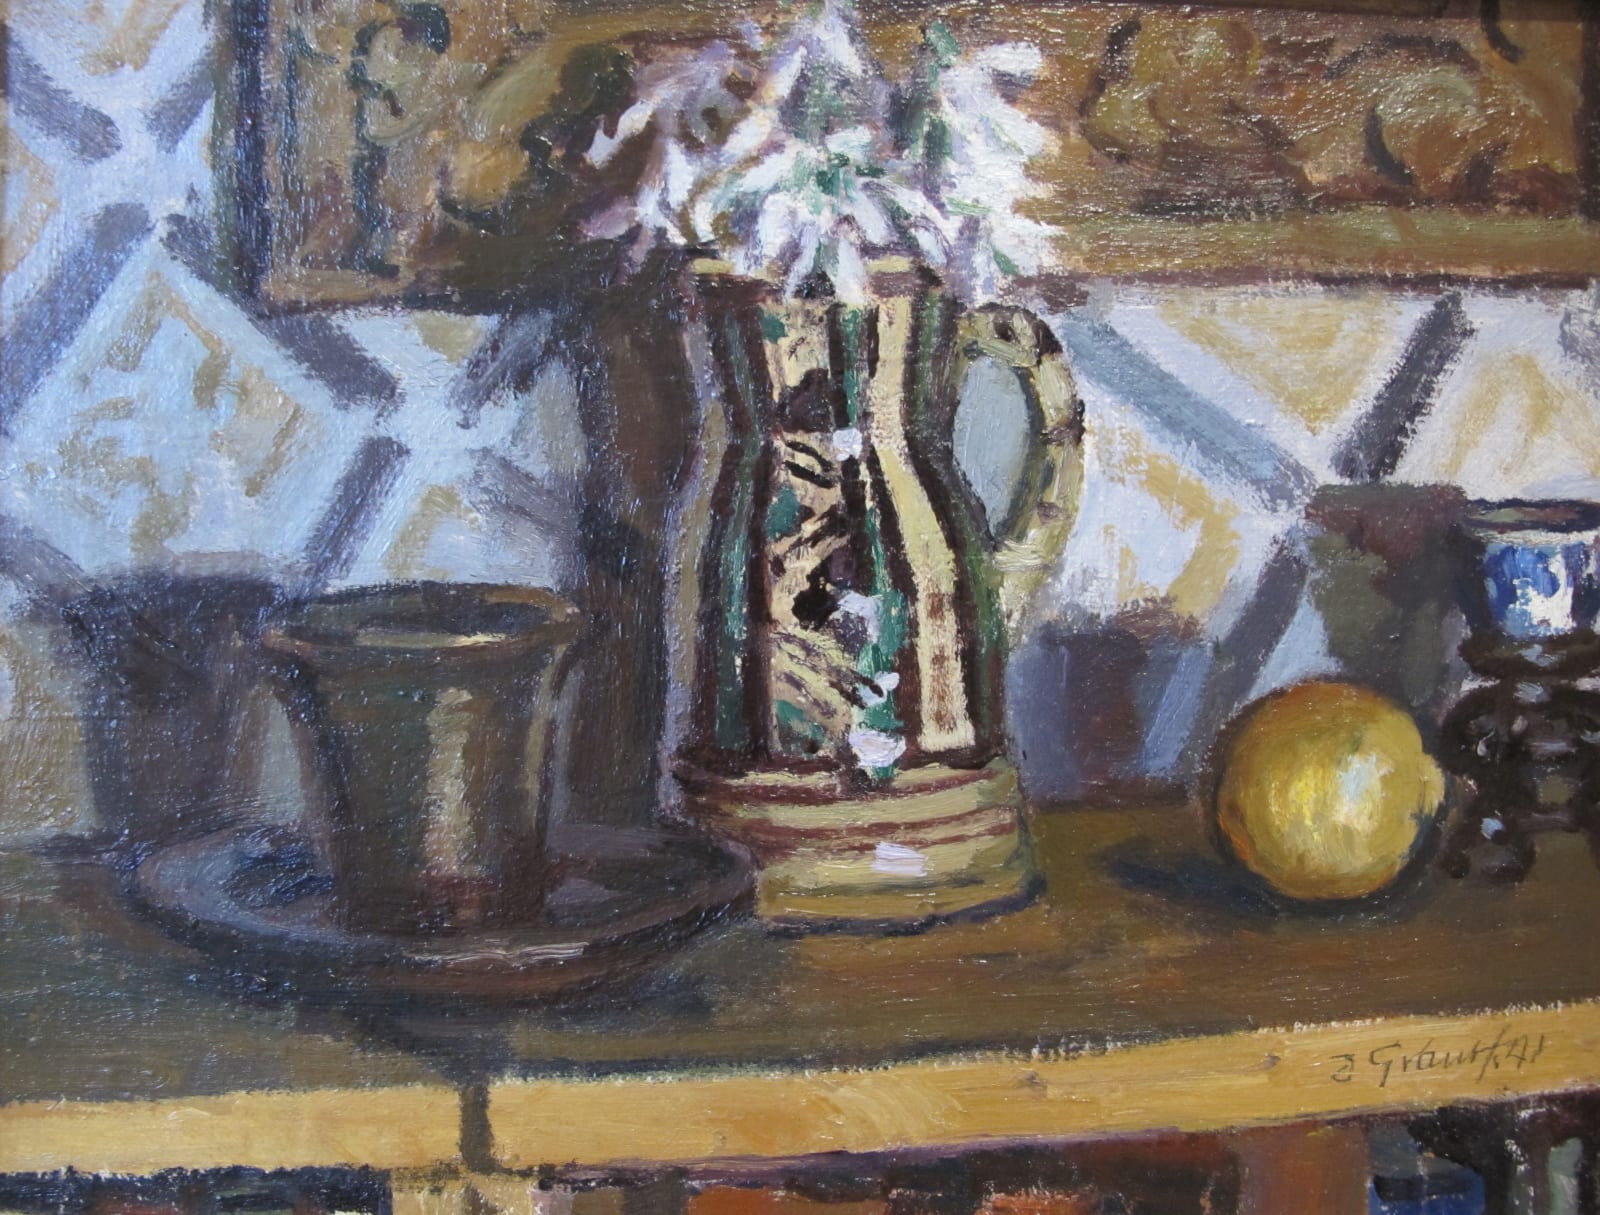 DUNCAN GRANT, Still Life with Jug and Flowers on a Shelf, Charlston, 1941